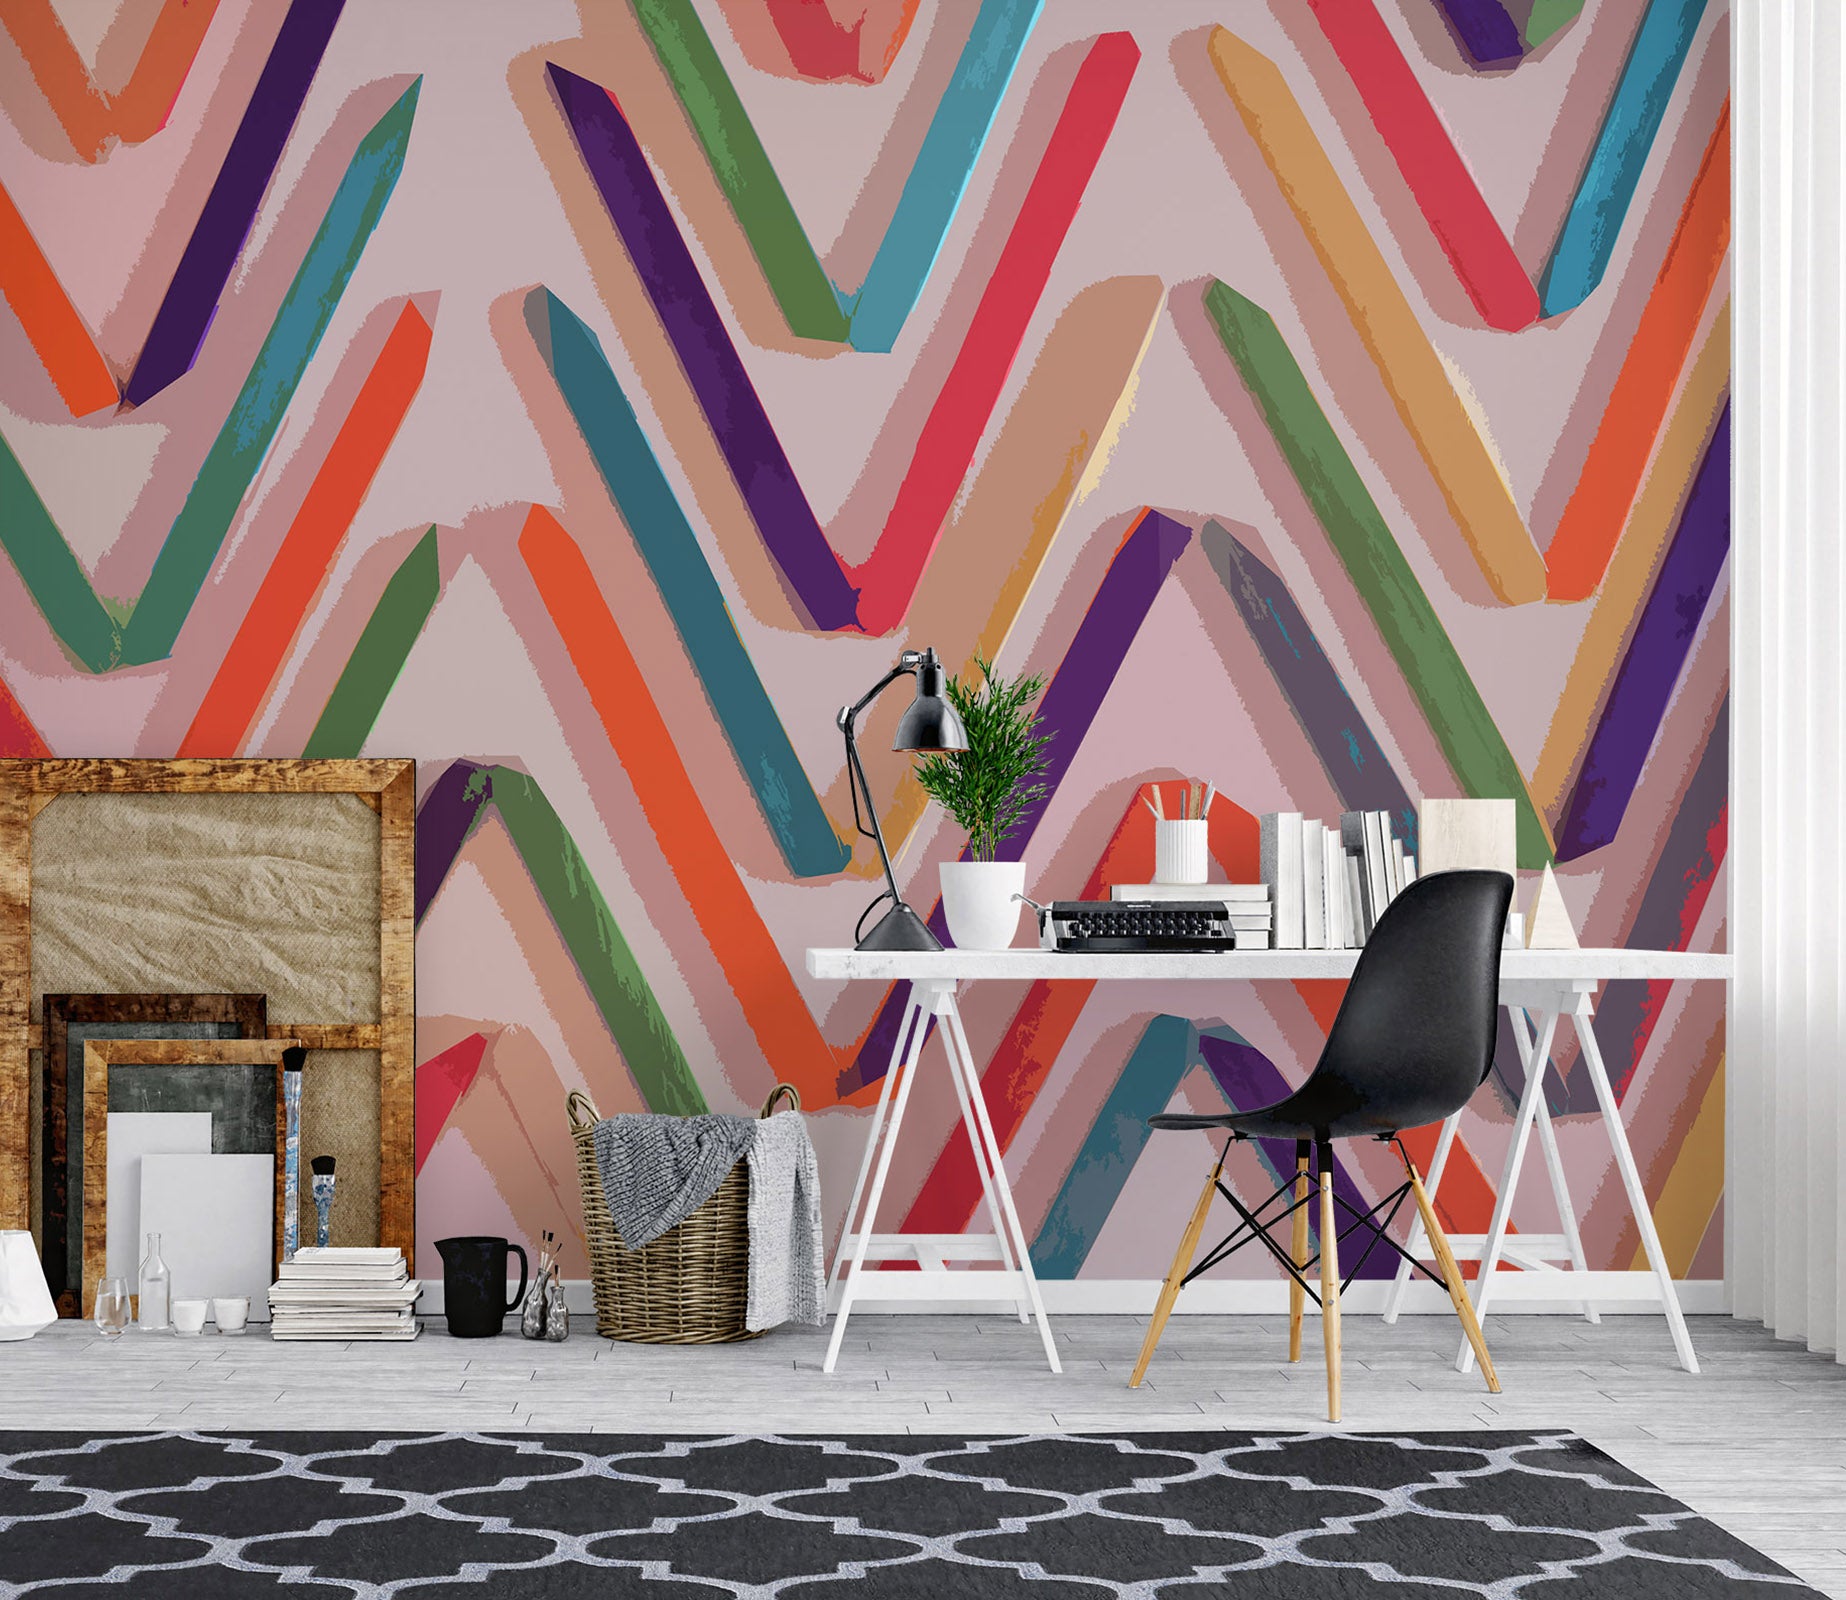 3D Colored Wavy Lines 71091 Shandra Smith Wall Mural Wall Murals